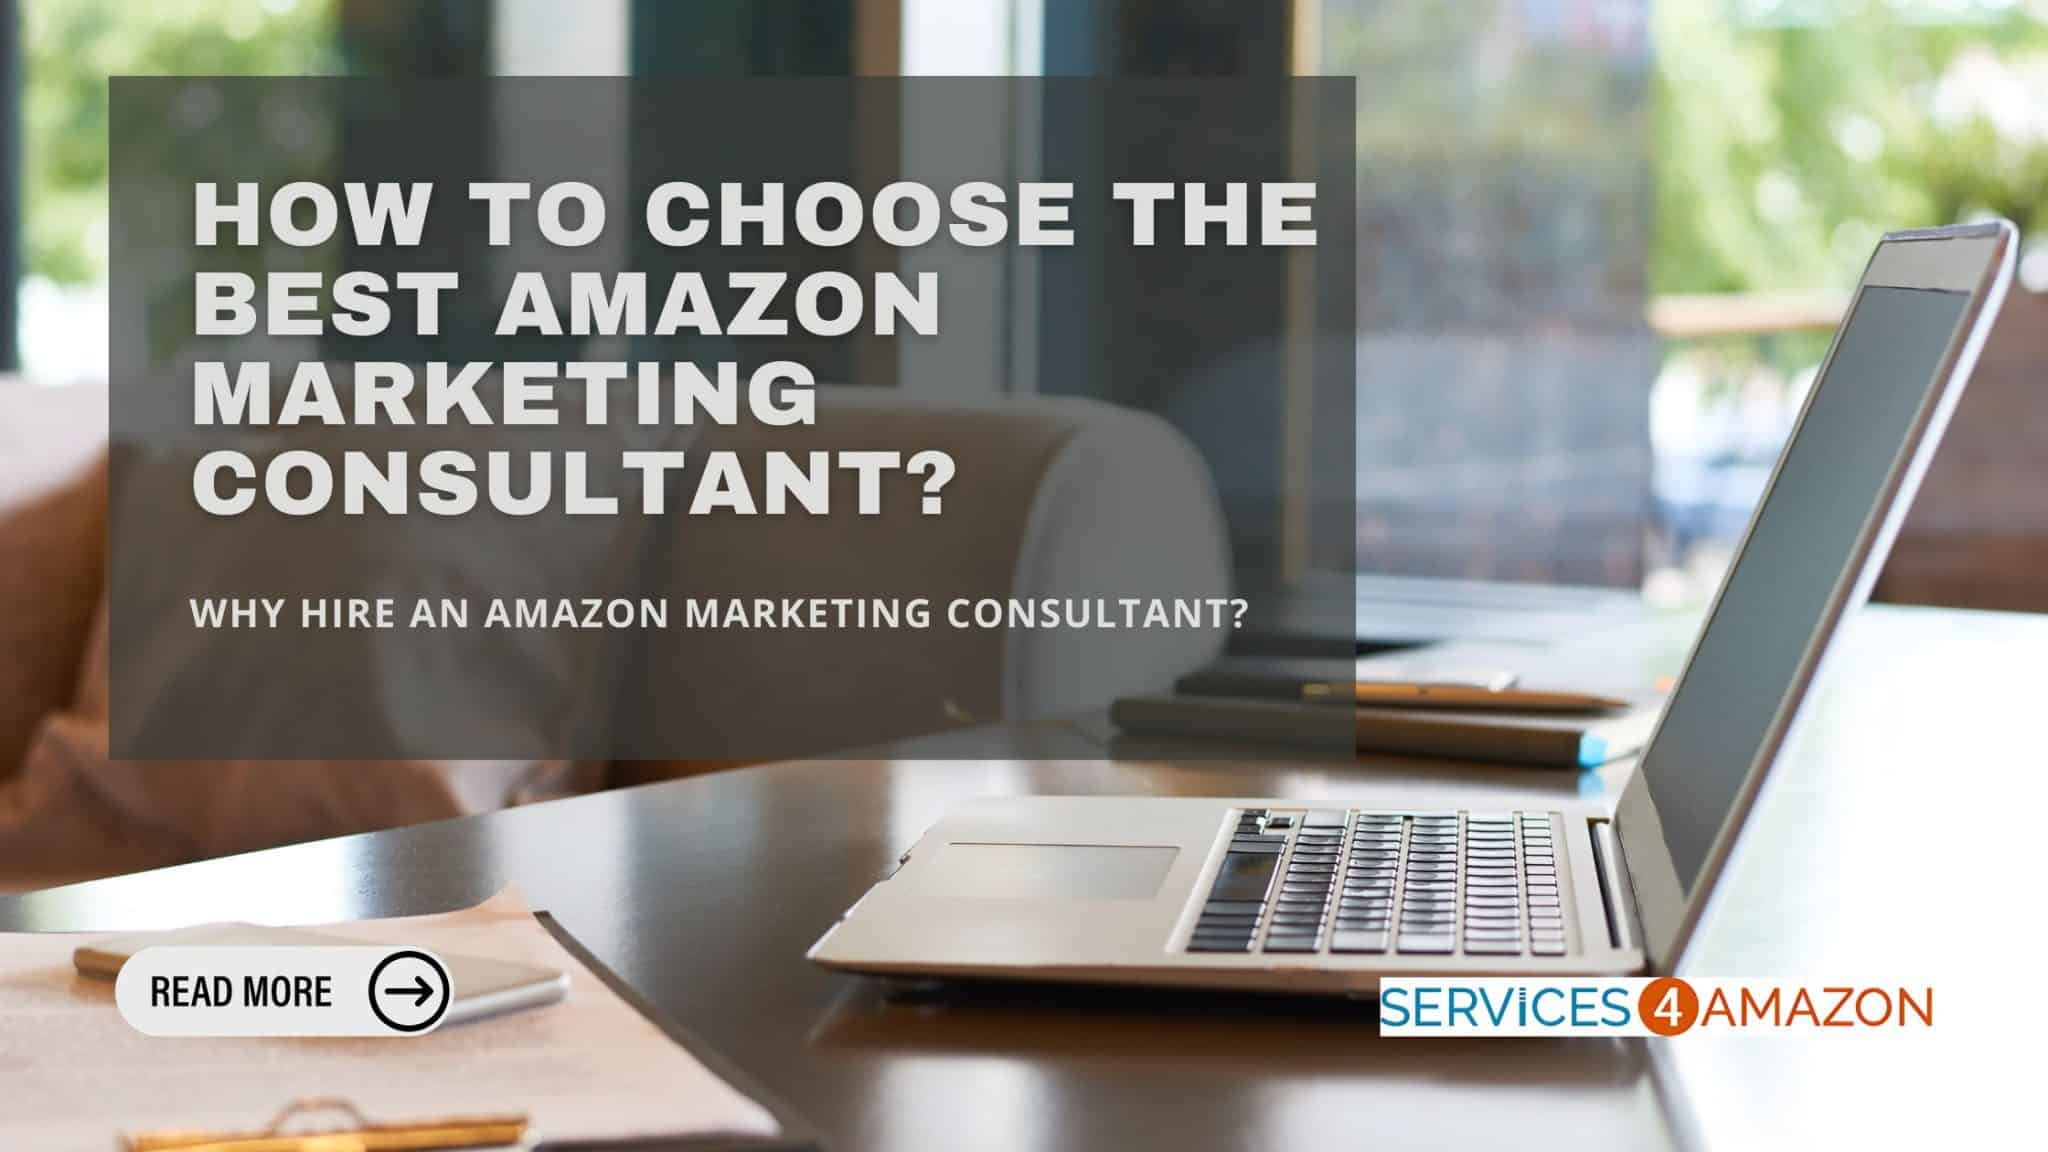 Choose the Best Amazon Marketing Consultant